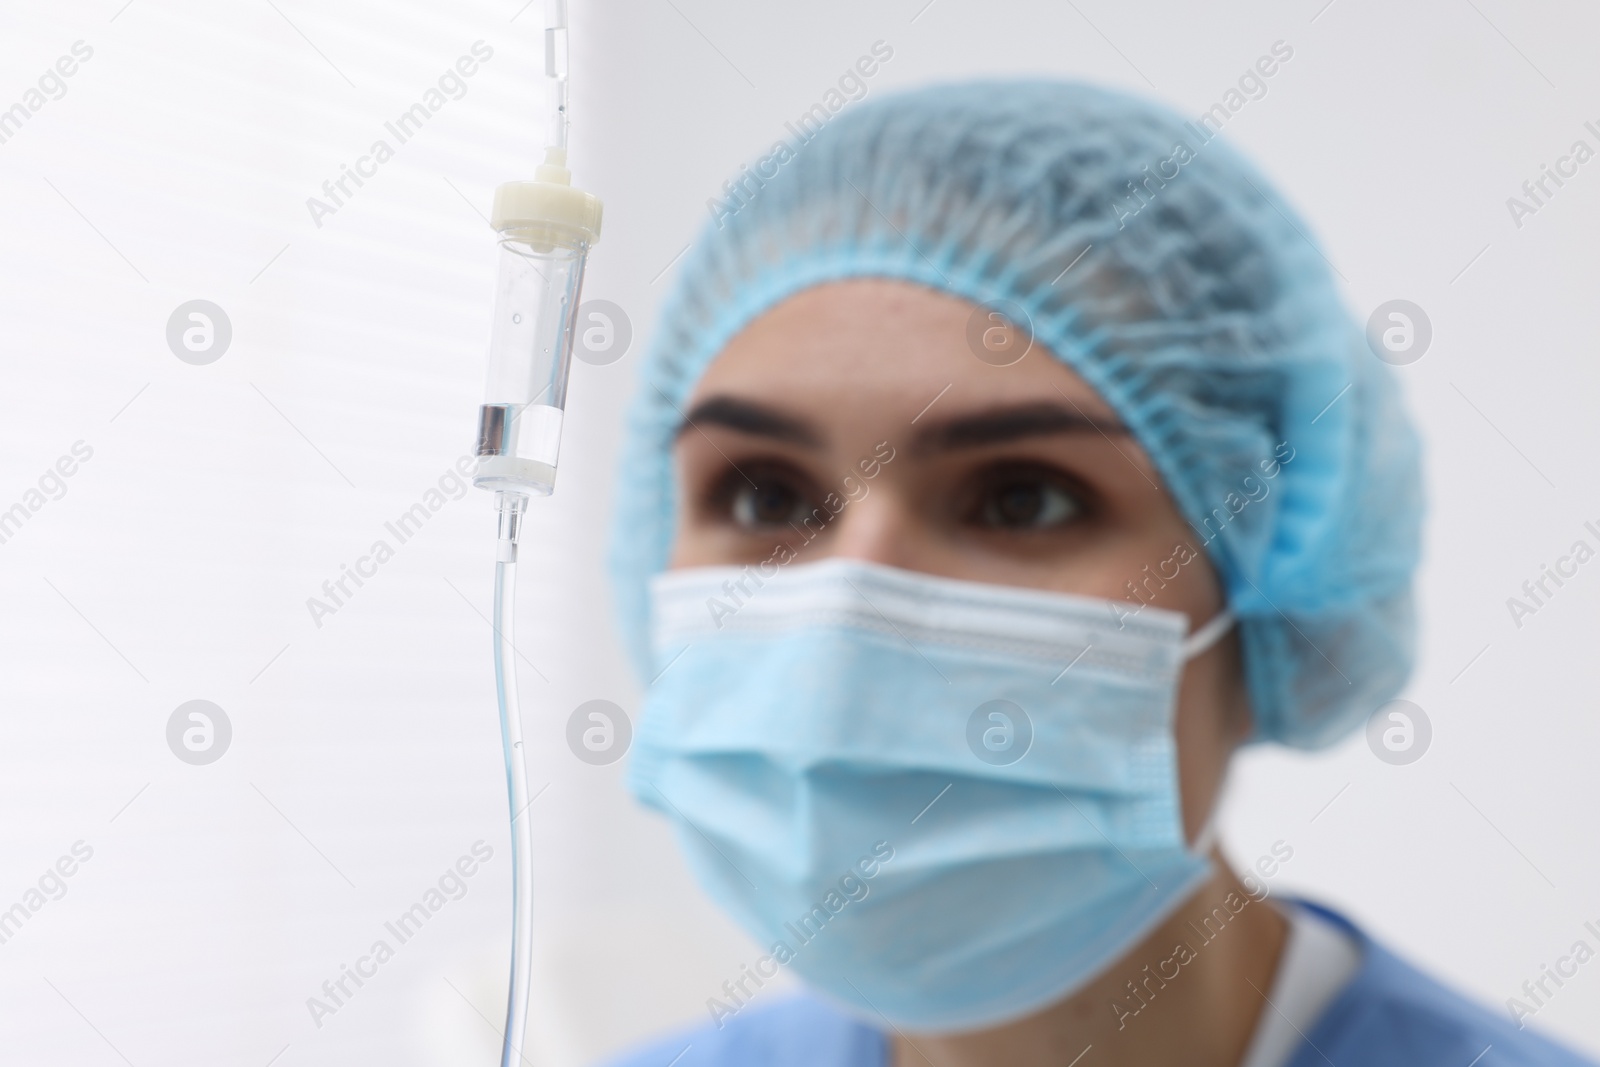 Photo of Setting up IV drip. Nurse on blurred background, selective focus